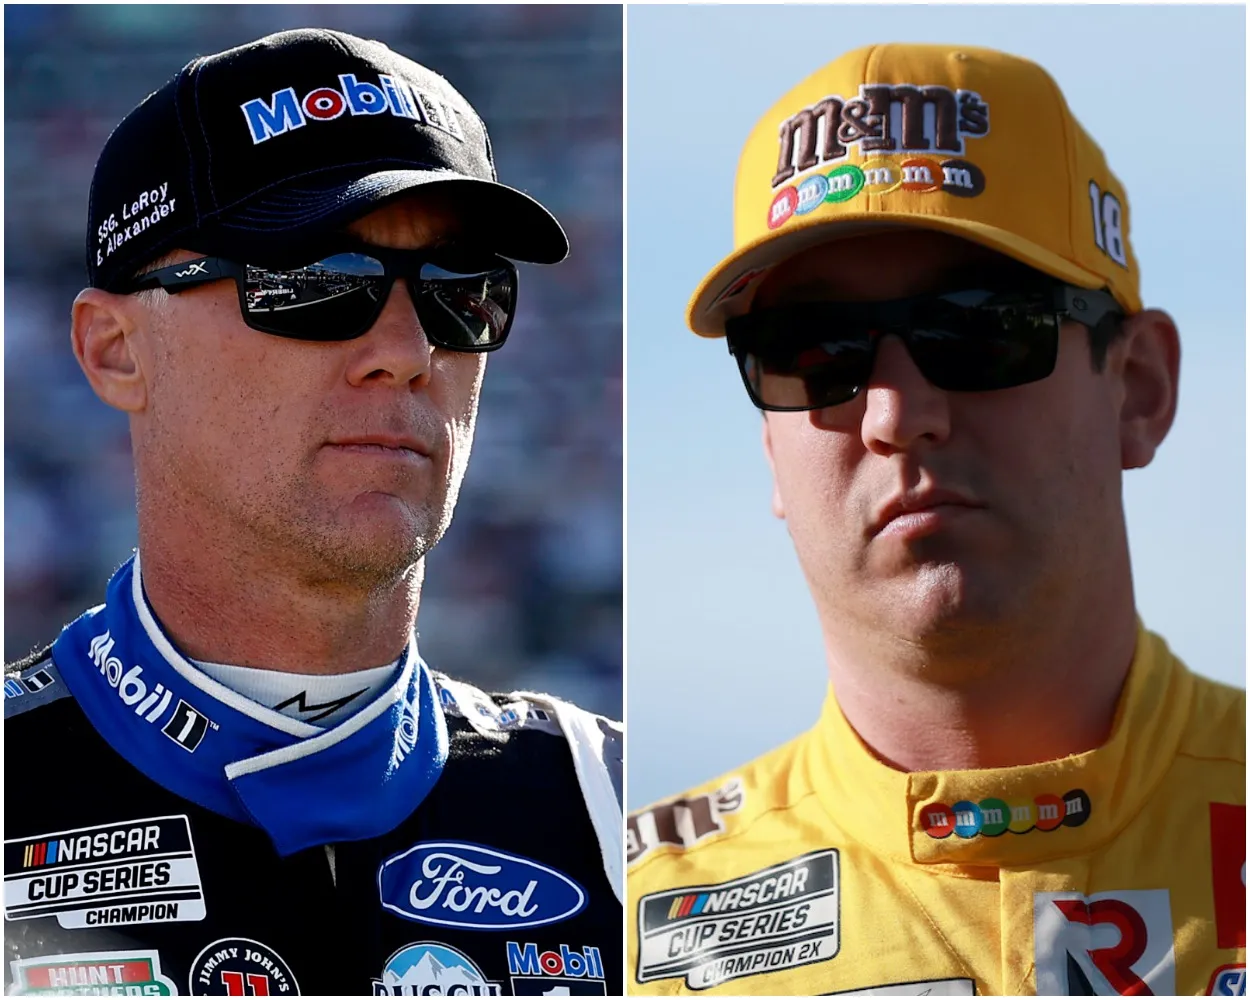 Inspiredlovers Kevin-Harvick-and-Kyle-Busch "Racing World Stunned: Kevin Harvick Reveals Shocking Secret, Plus Kyle Busch Mysteriously Vanishes - What's Really Going On?" Boxing Sports  NASCAR News Kyle Busch Kevin Harvick 